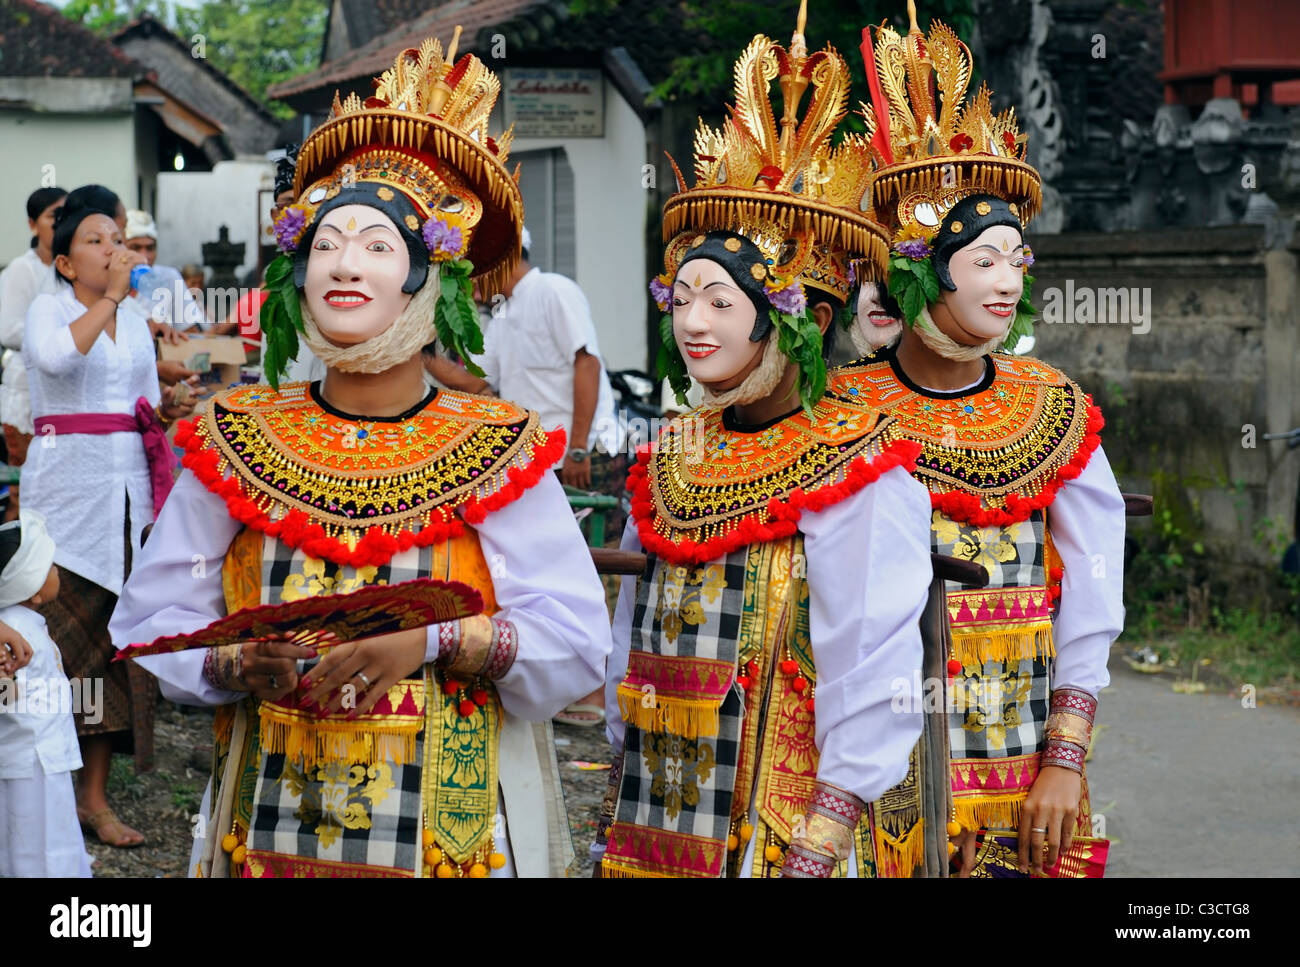 balinese dancers in colorful masks and costumes, indonesia Stock Photo